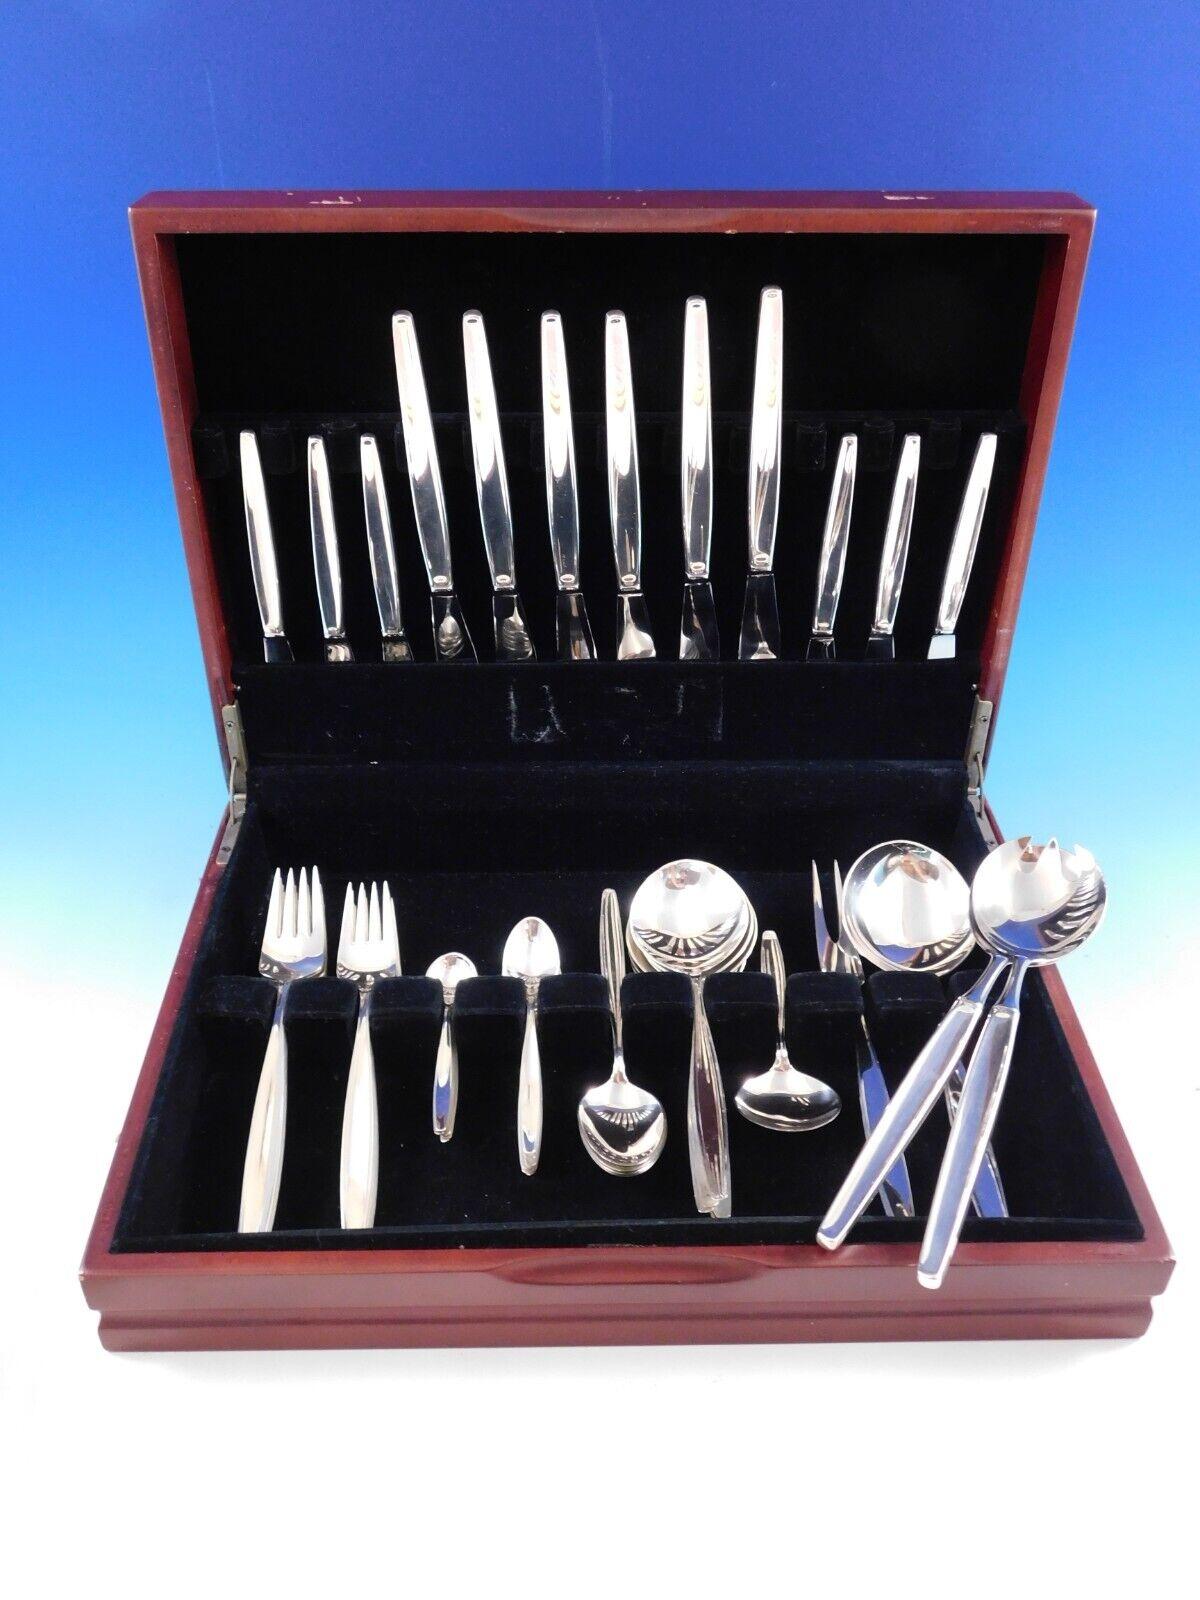 Mid-Century Modern Cypress by Georg Jensen sterling silver Flatware set, 53 pieces. This set includes:

6 Dinner Size Knives, long handle, 8 7/8